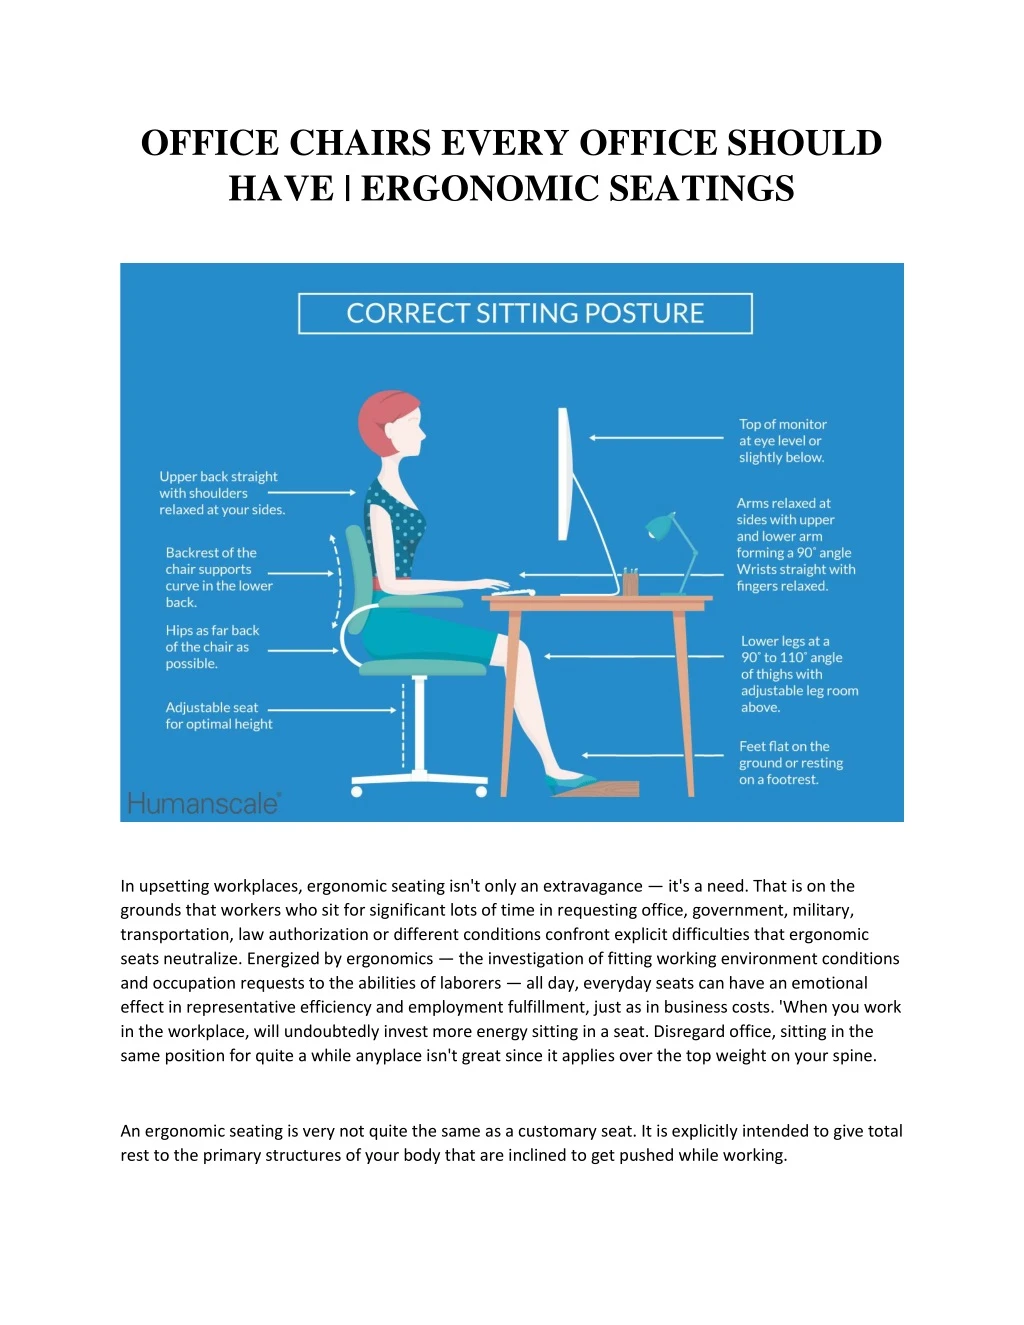 office chairs every office should have ergonomic